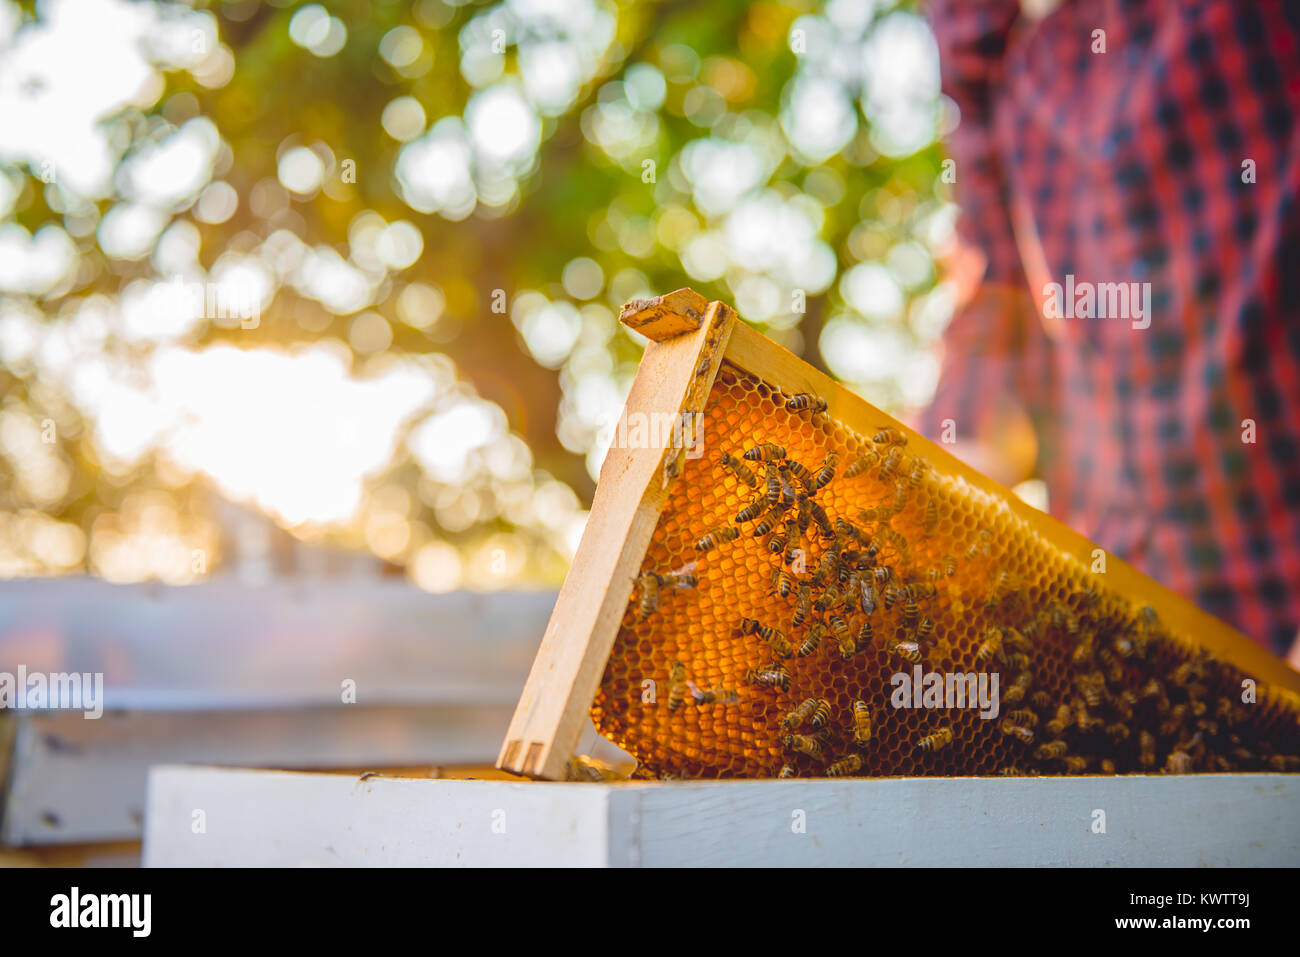 Close up photo of hive frame with bees Stock Photo